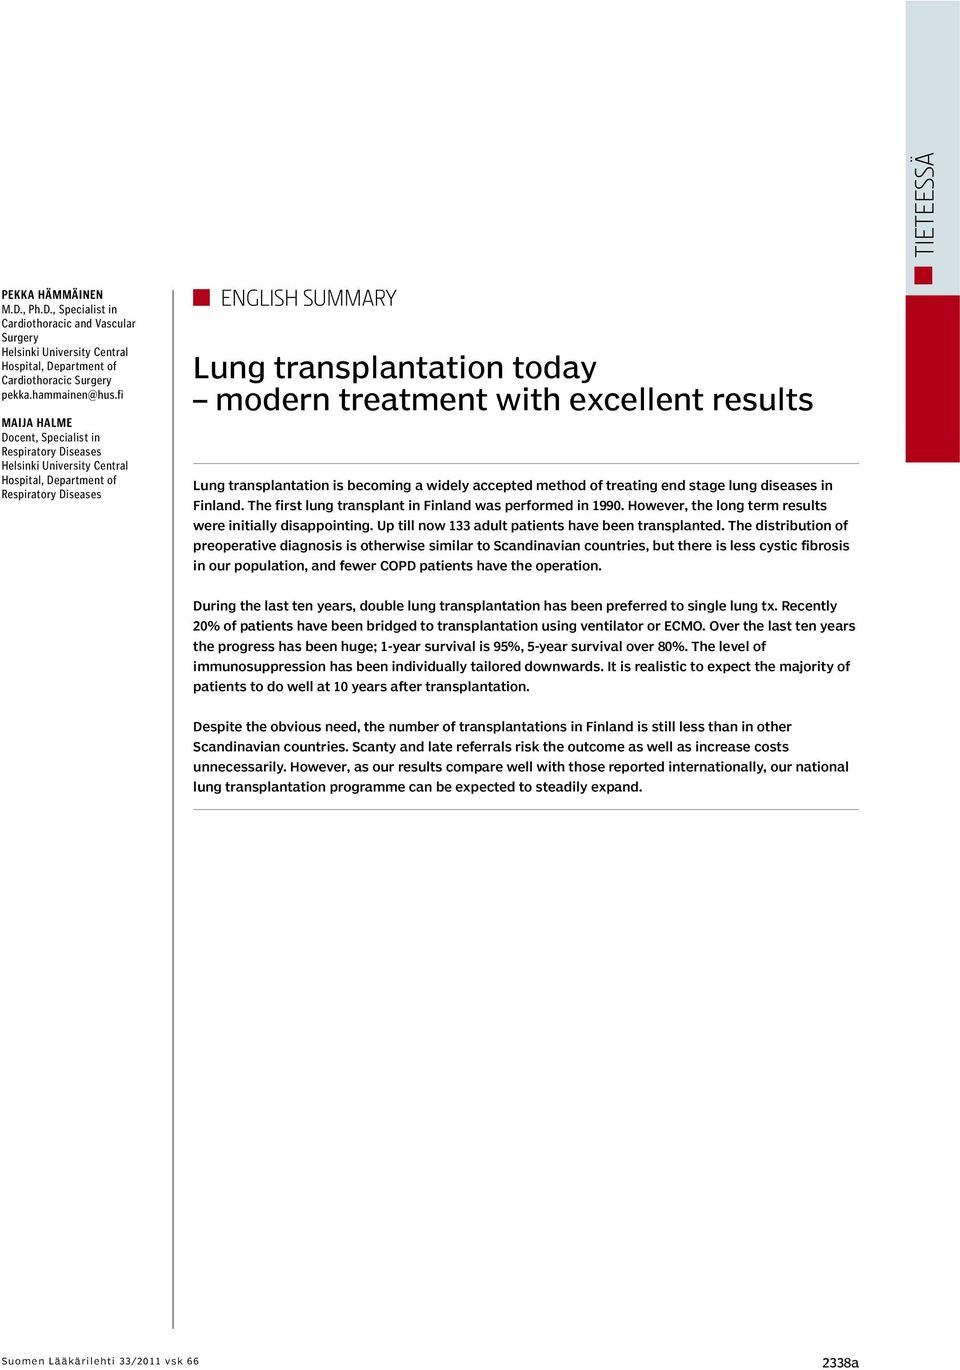 excellent results Lung transplantation is becoming a widely accepted method of treating end stage lung diseases in Finland. The first lung transplant in Finland was performed in 1990.